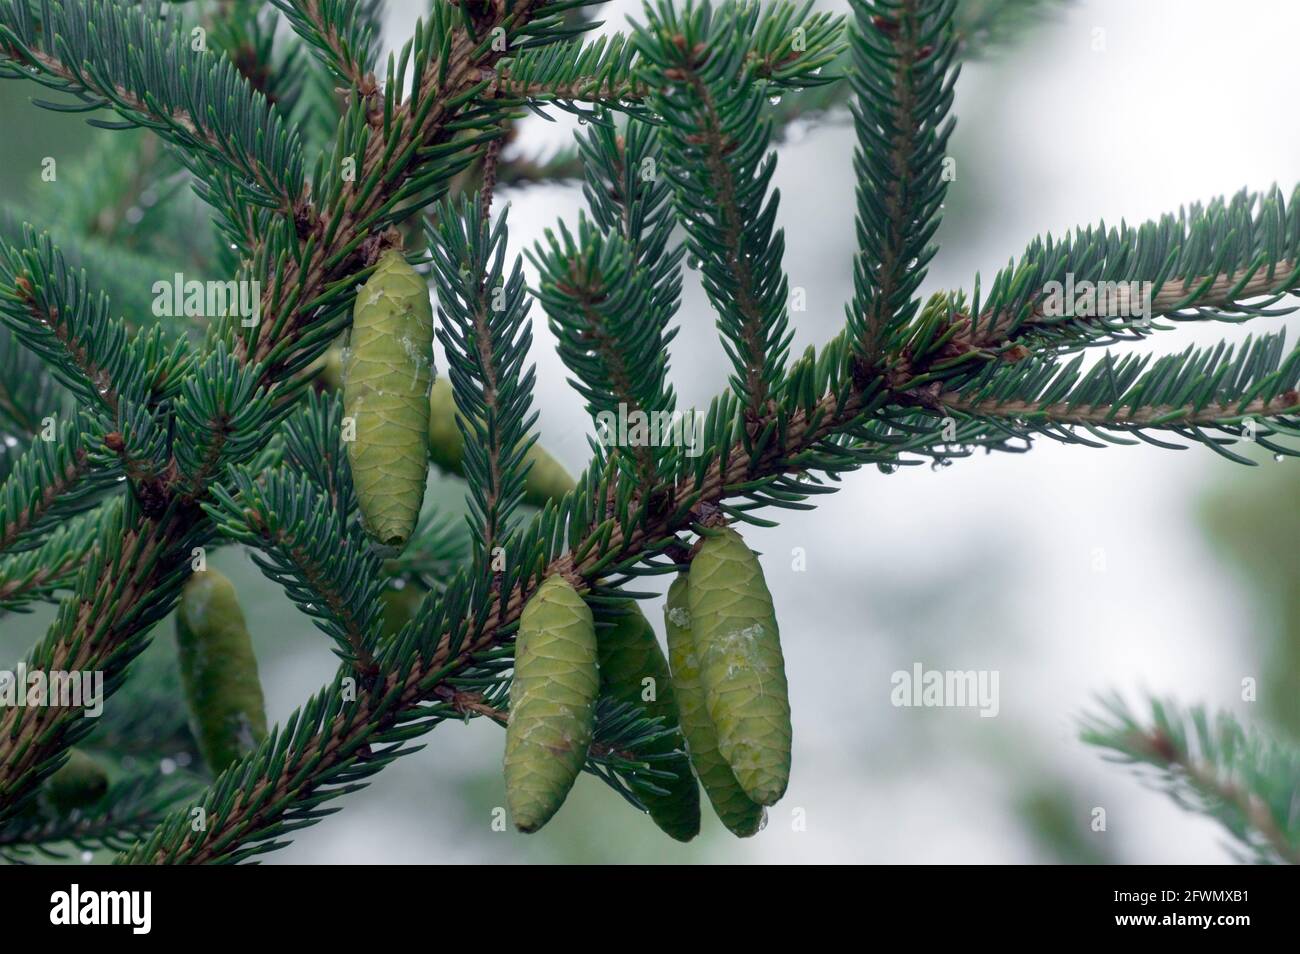 Immature cones on branches of White Spruce Tree, Picea glauca, oozing sap Stock Photo